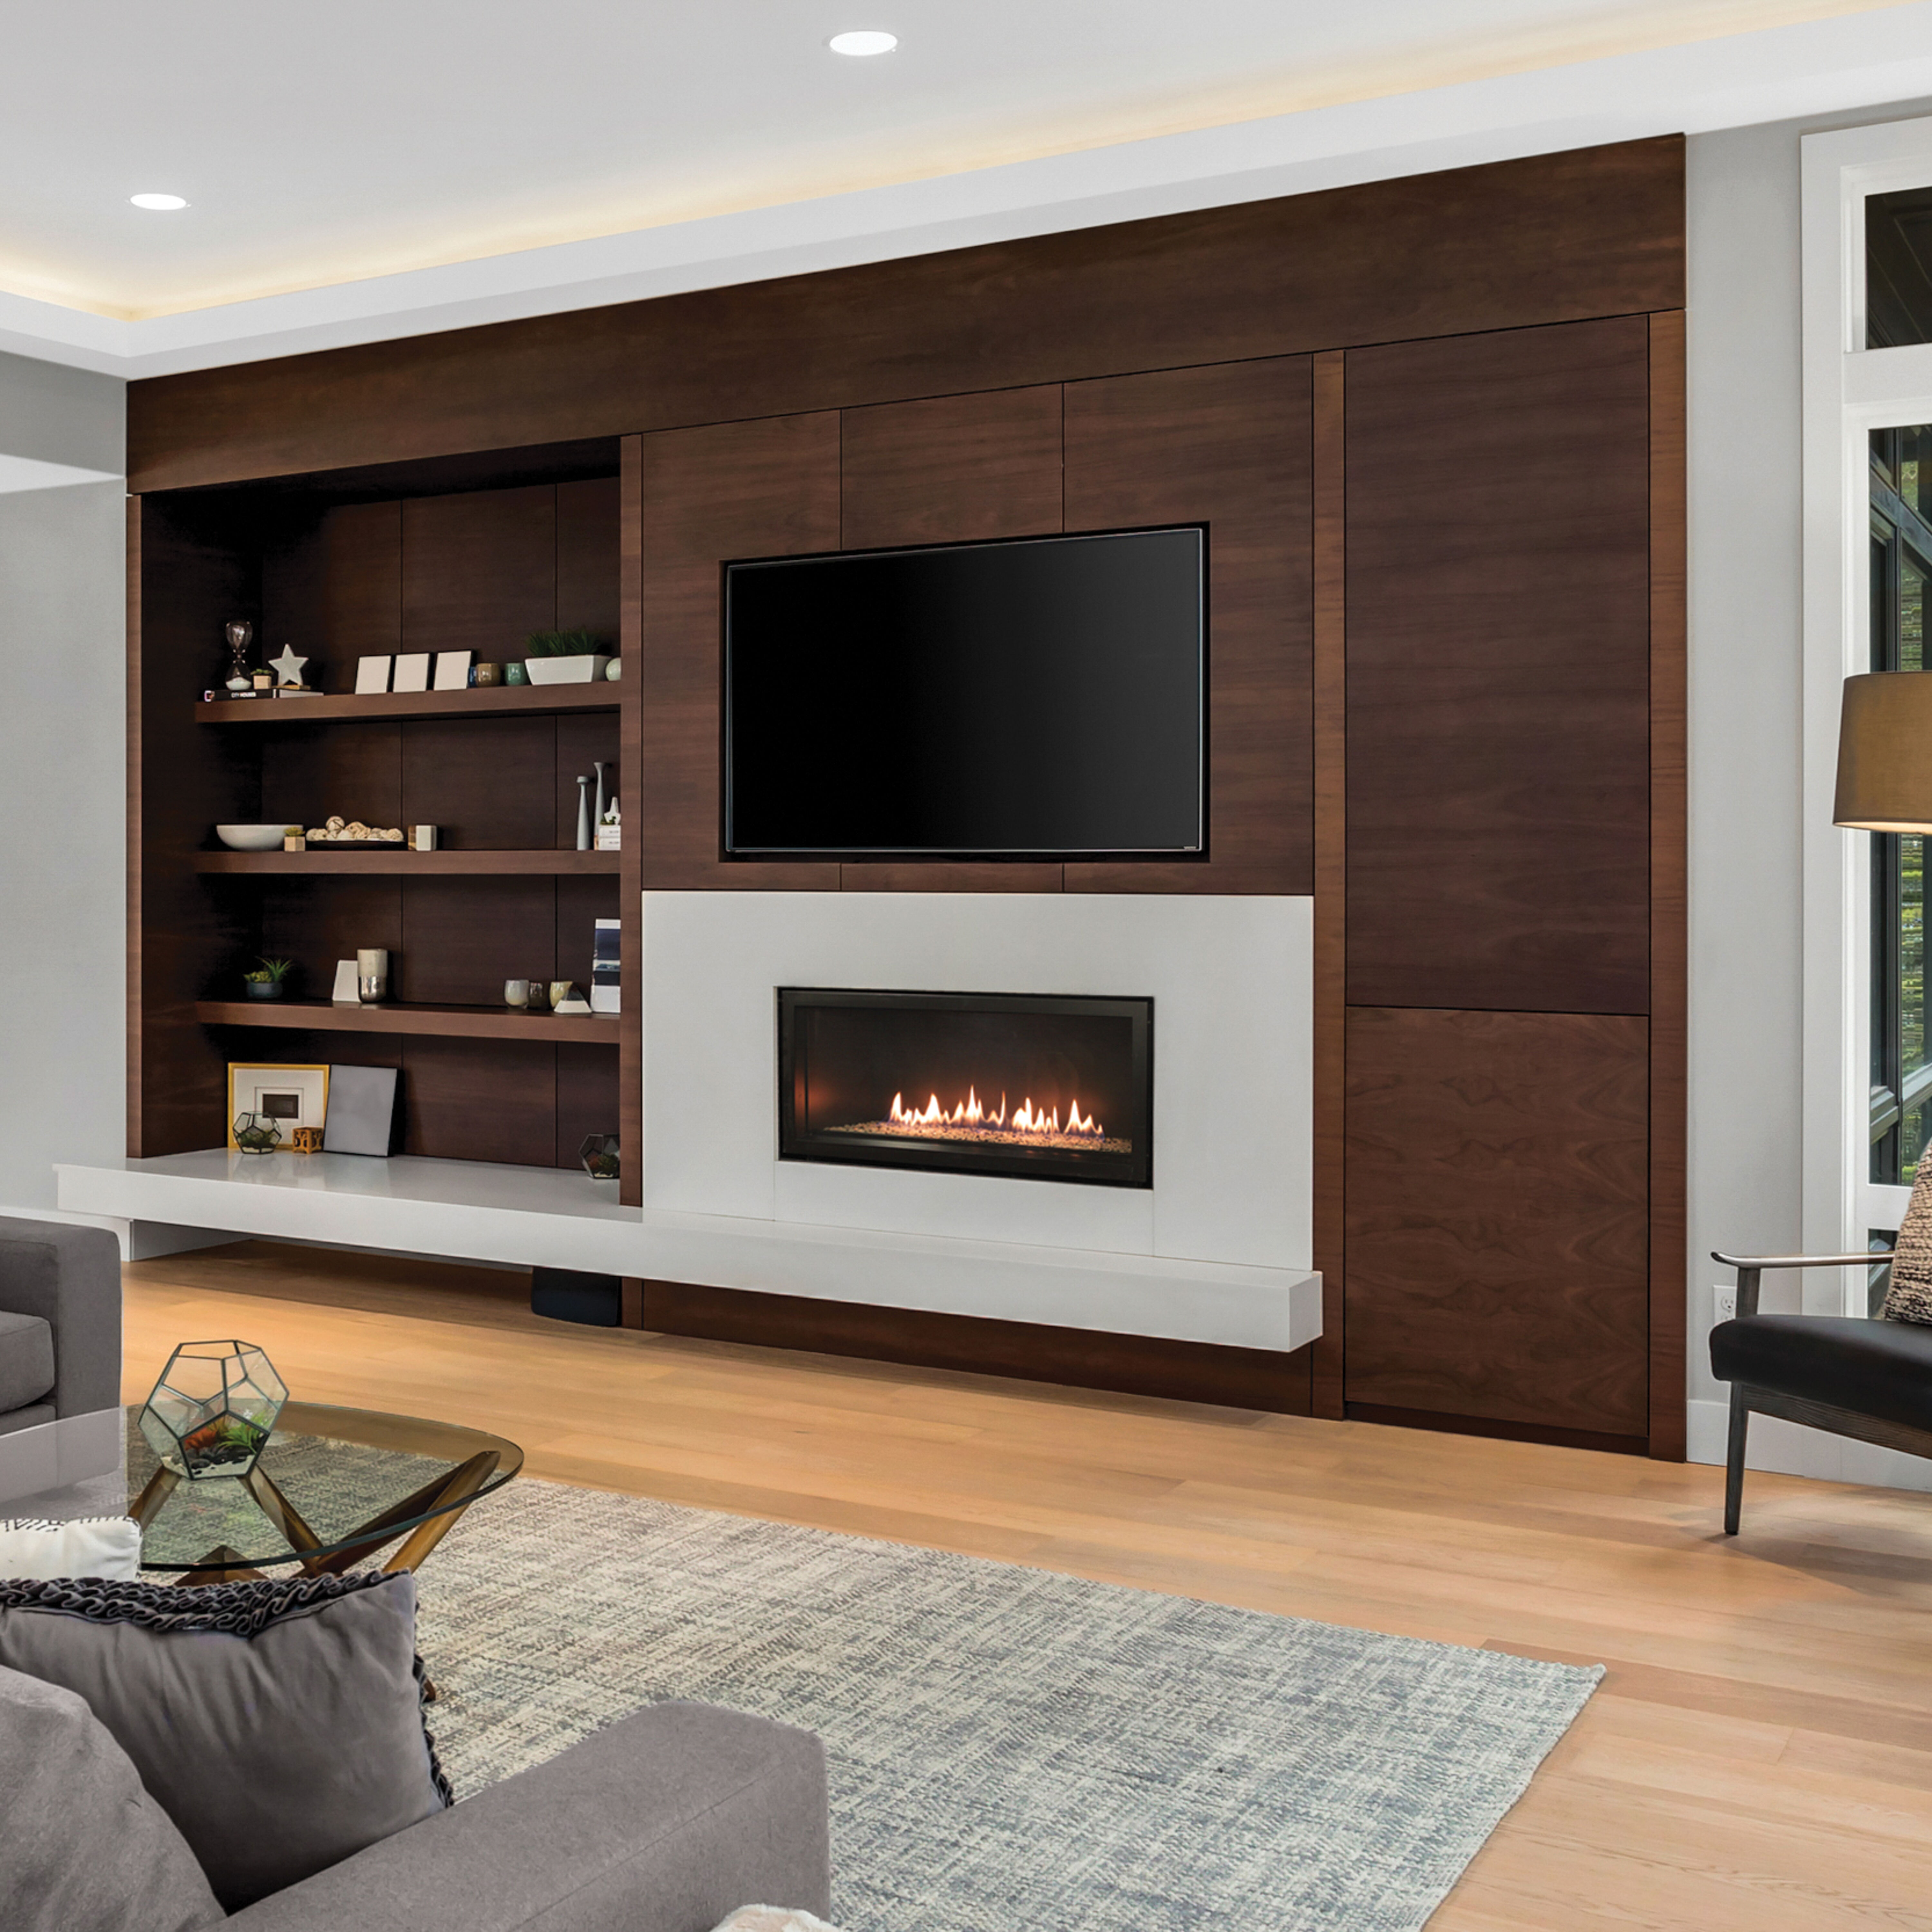 The Empire Contemporary Boulevard Direct Vent Gas Fireplace installed into an entertainment center in a living room with brown shelves and a large TV mounted over the fireplace.